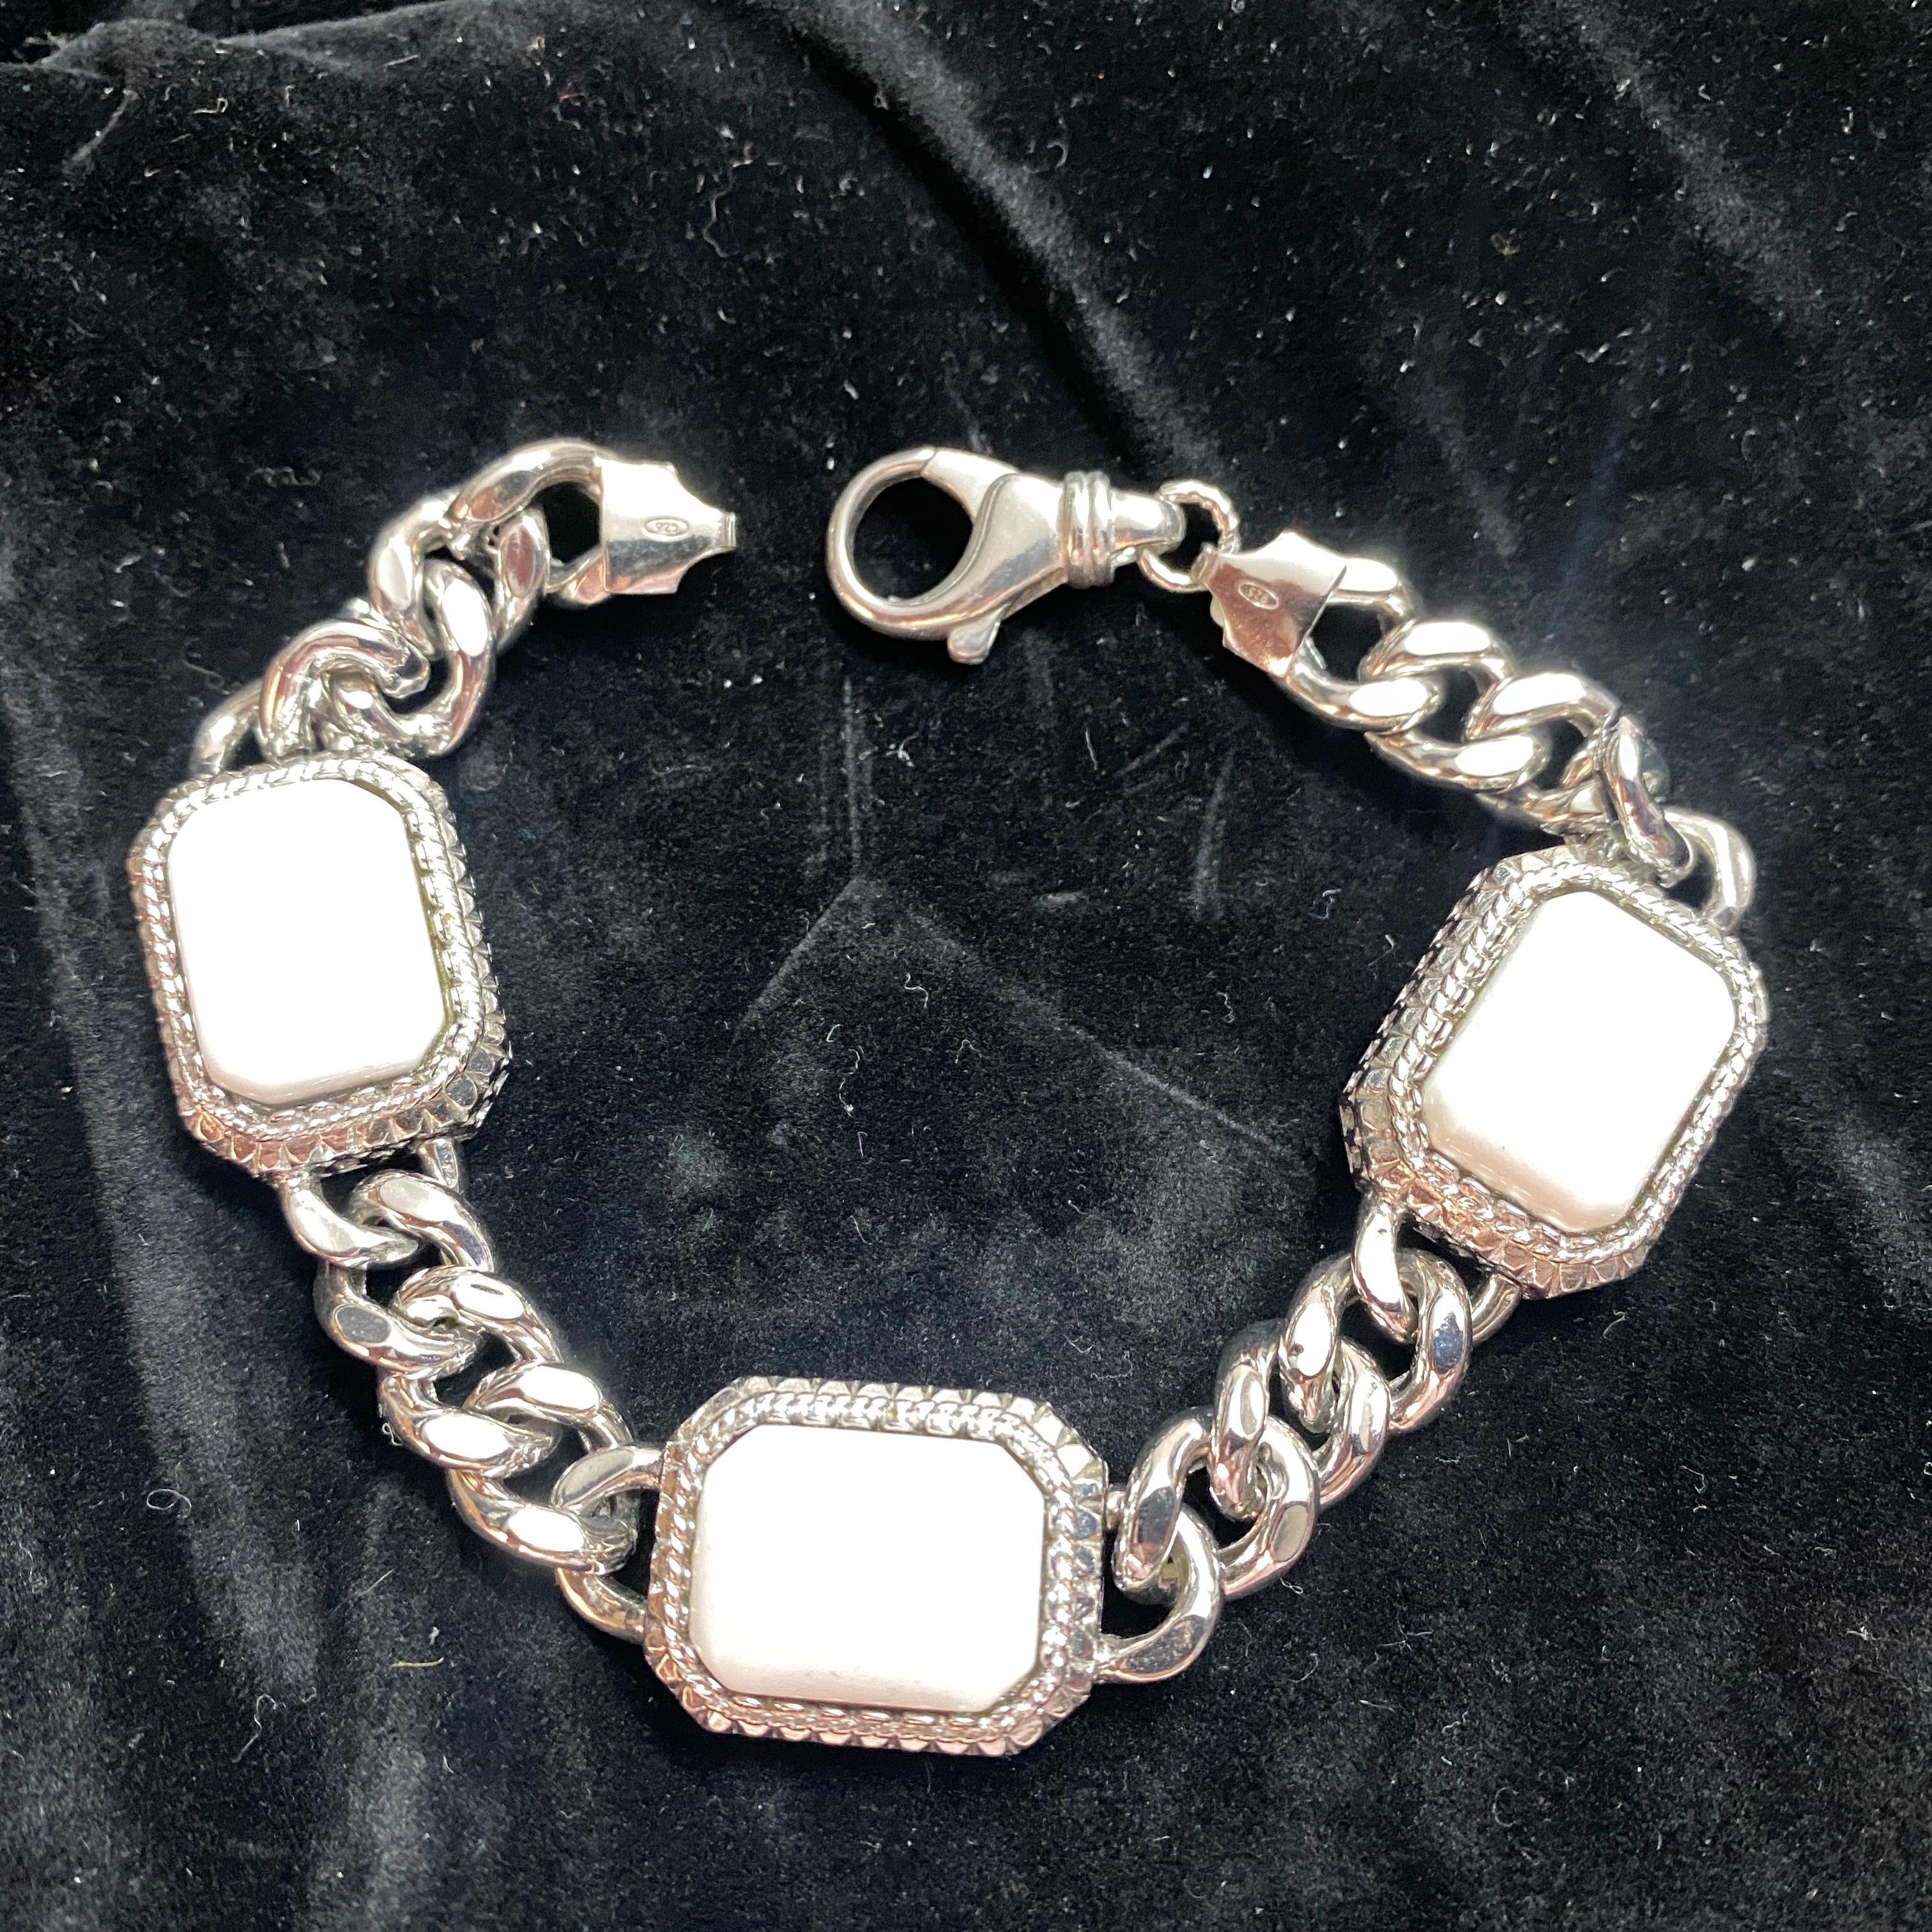 An high quality sterling silver and rectangular white agate cabochon designed by Lucio Cestelli and manufactured in Italy by Anomis. Totally hand-crafted like a jewel. It's never worn. This vintage bracelet made with sterling silver and featuring